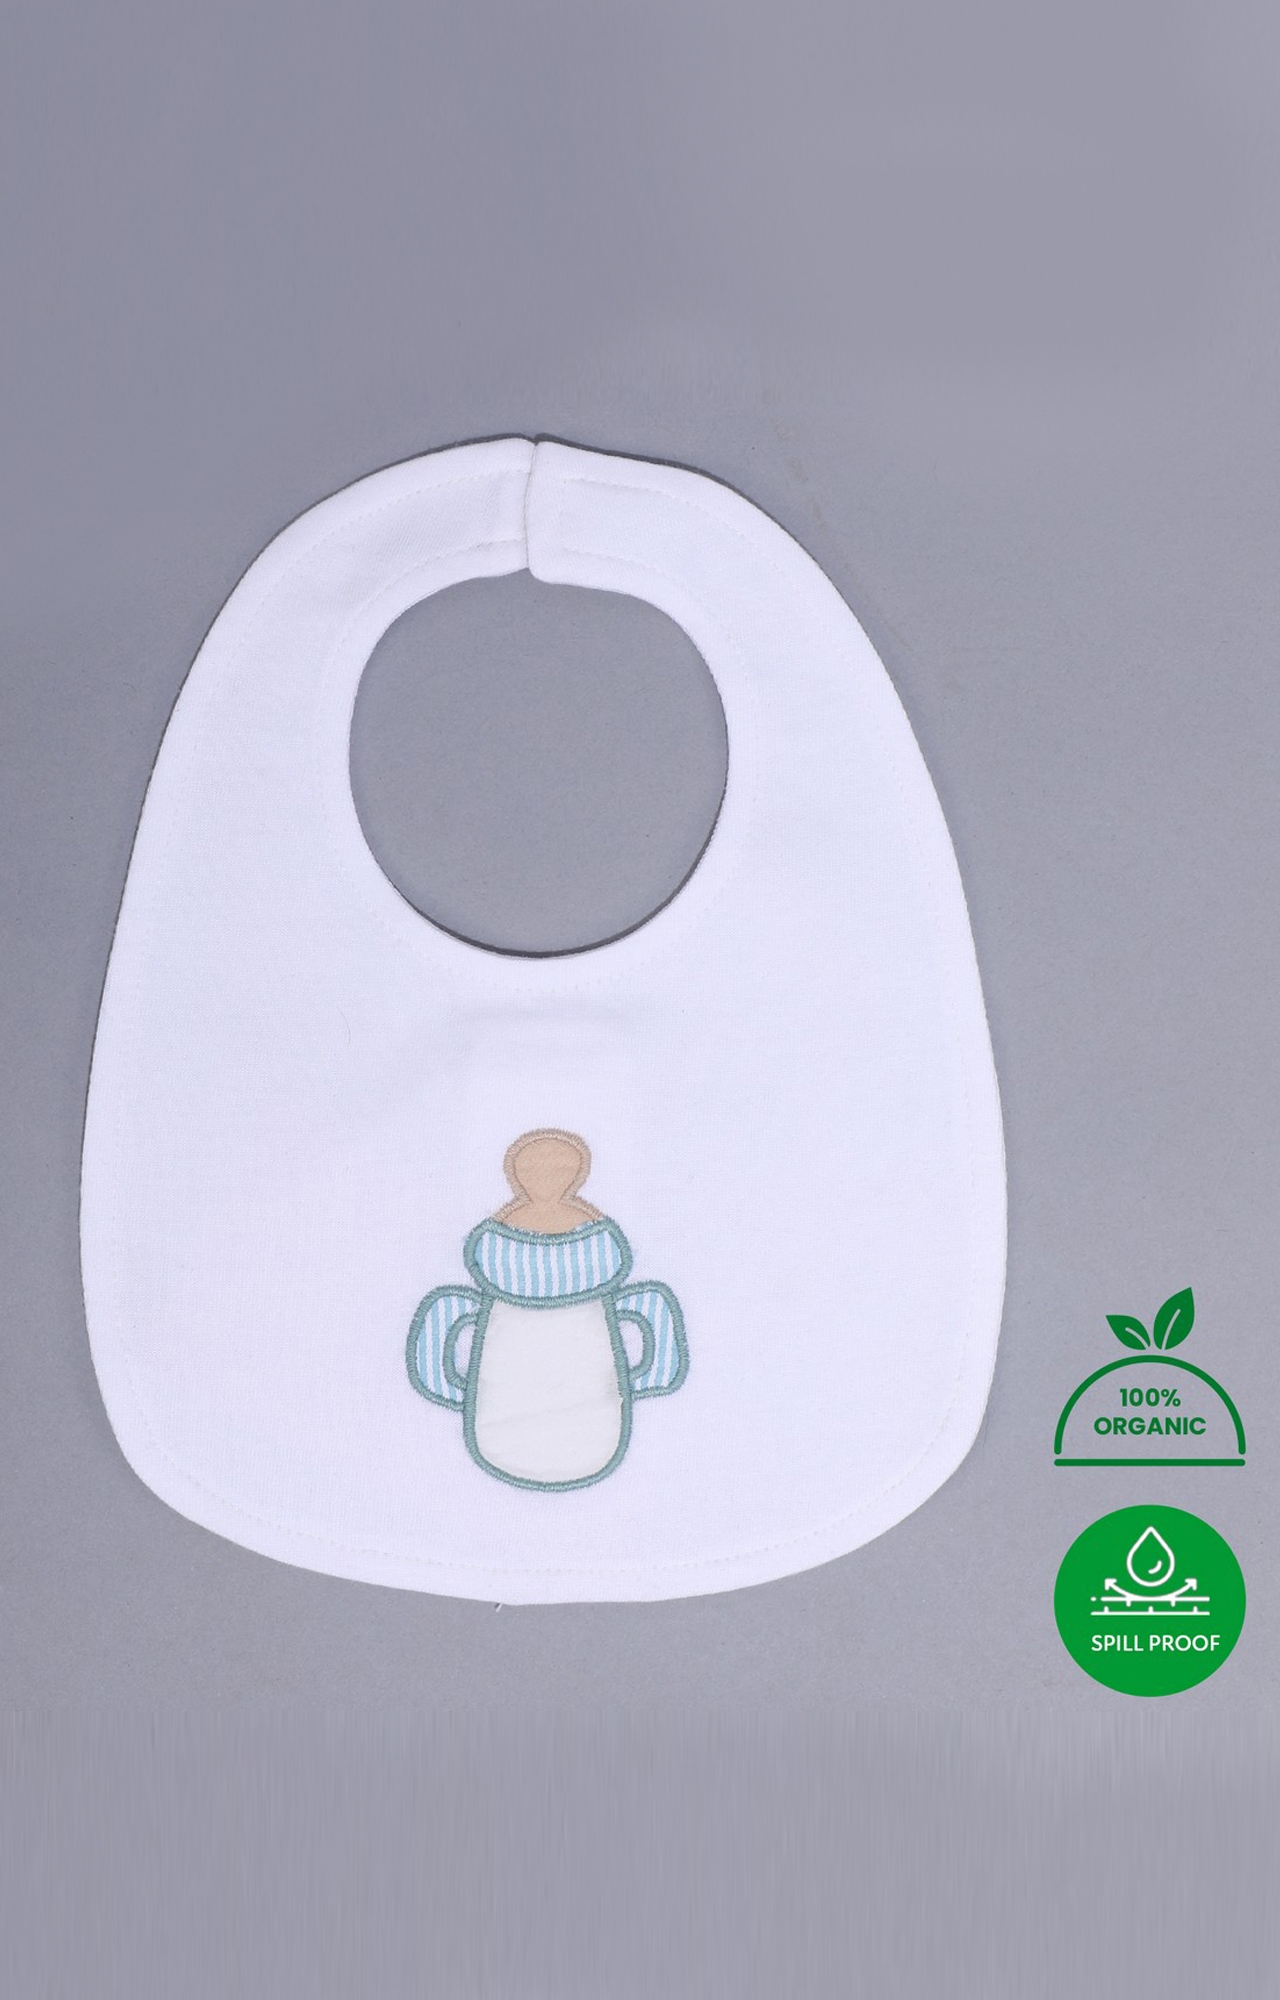 Kidbea | Printed Baby Blue and White Feeding Bib With Spill-Proof Finish 3